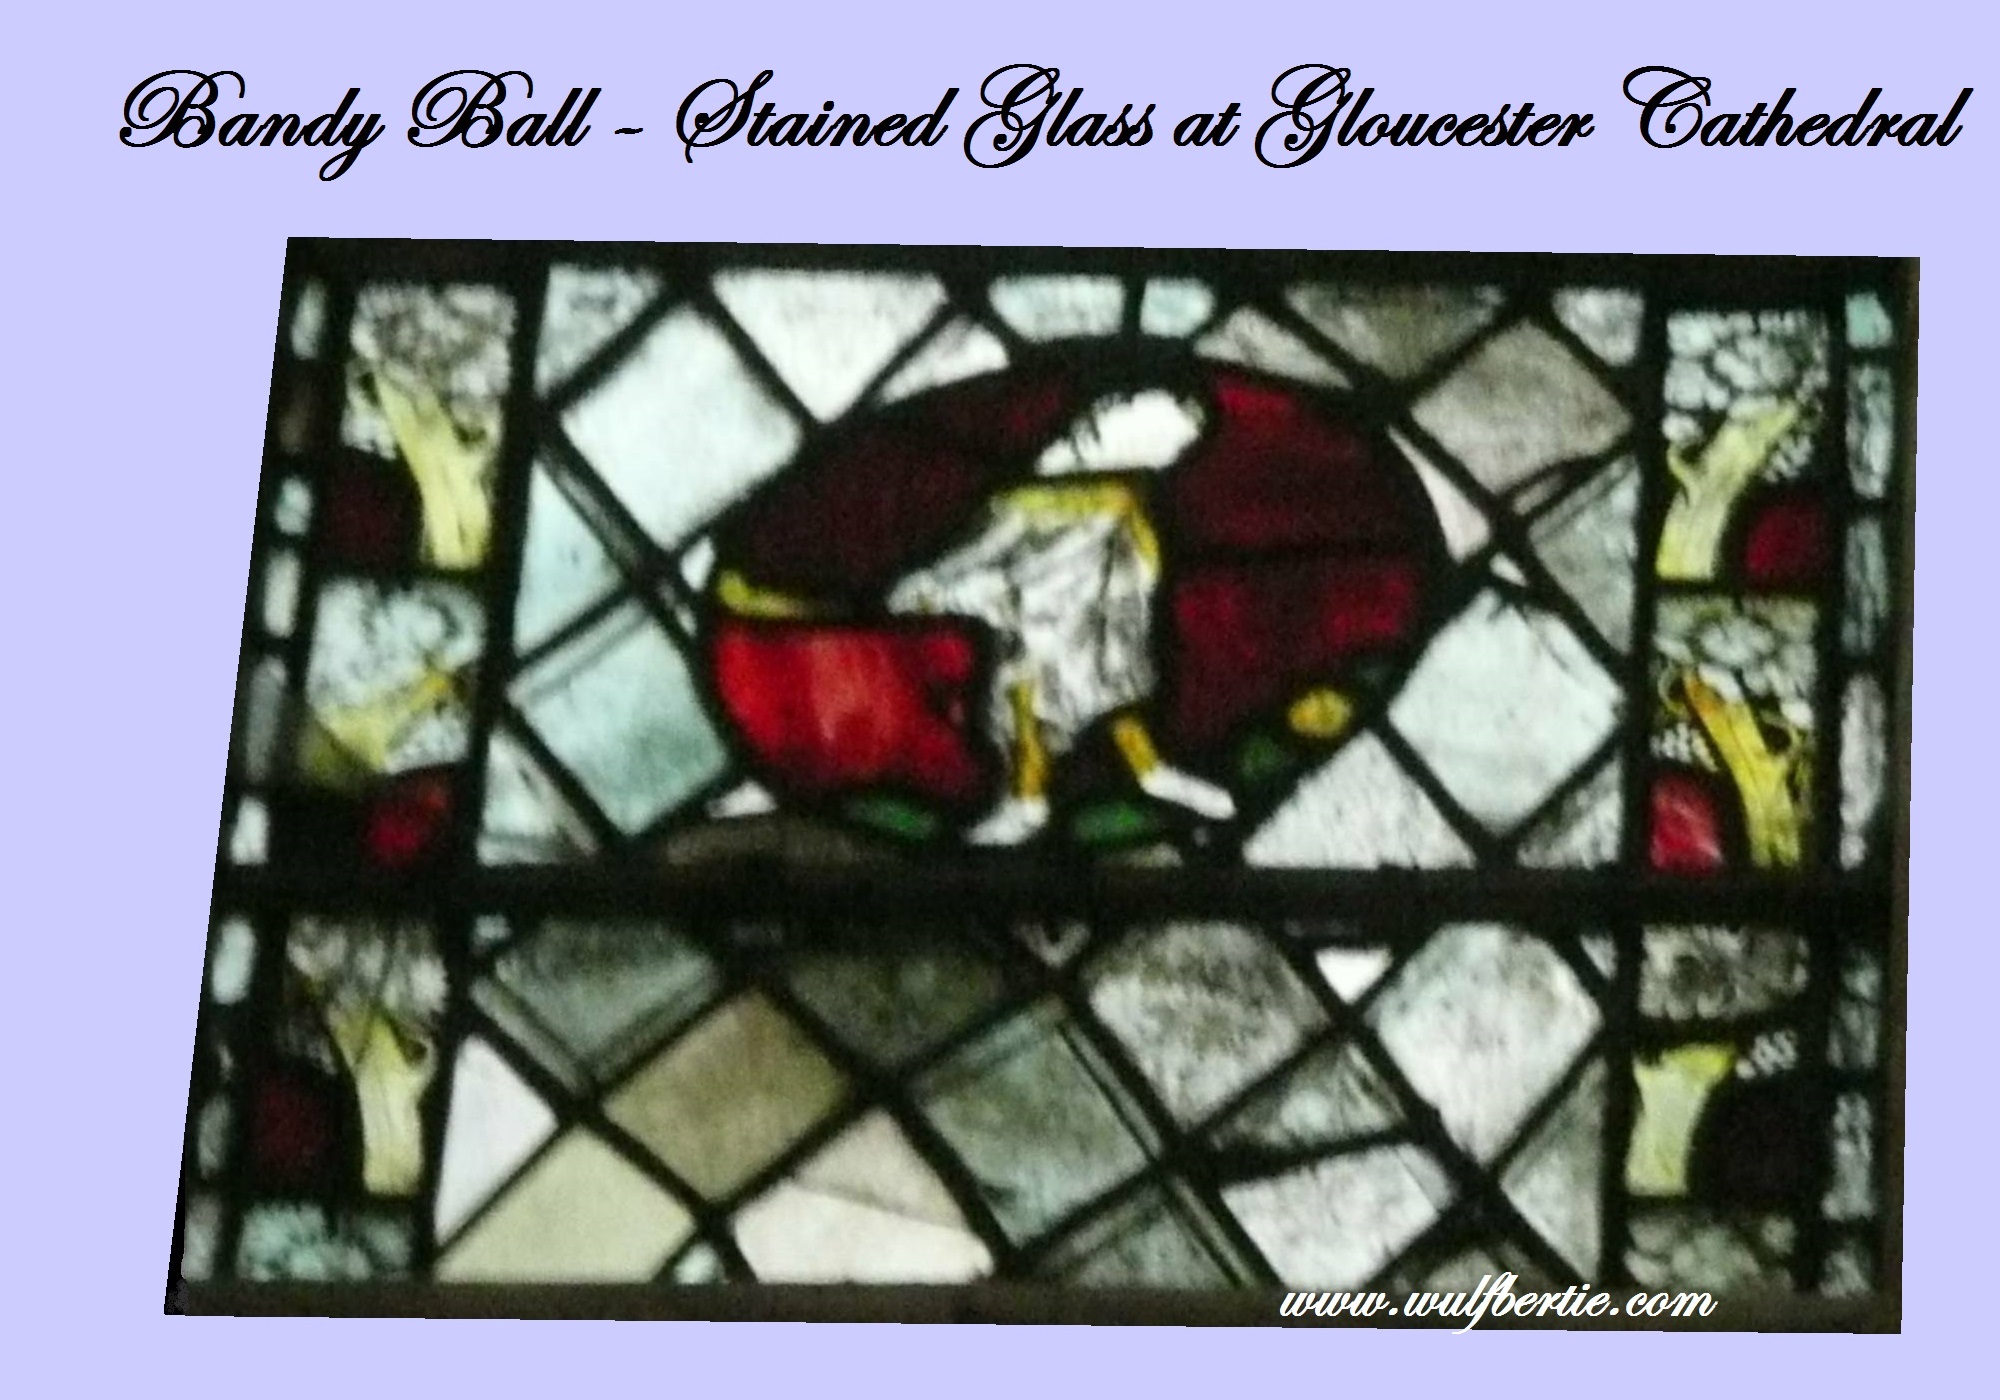 Bandy Ball - stained glass window at Gloucester Cathedral